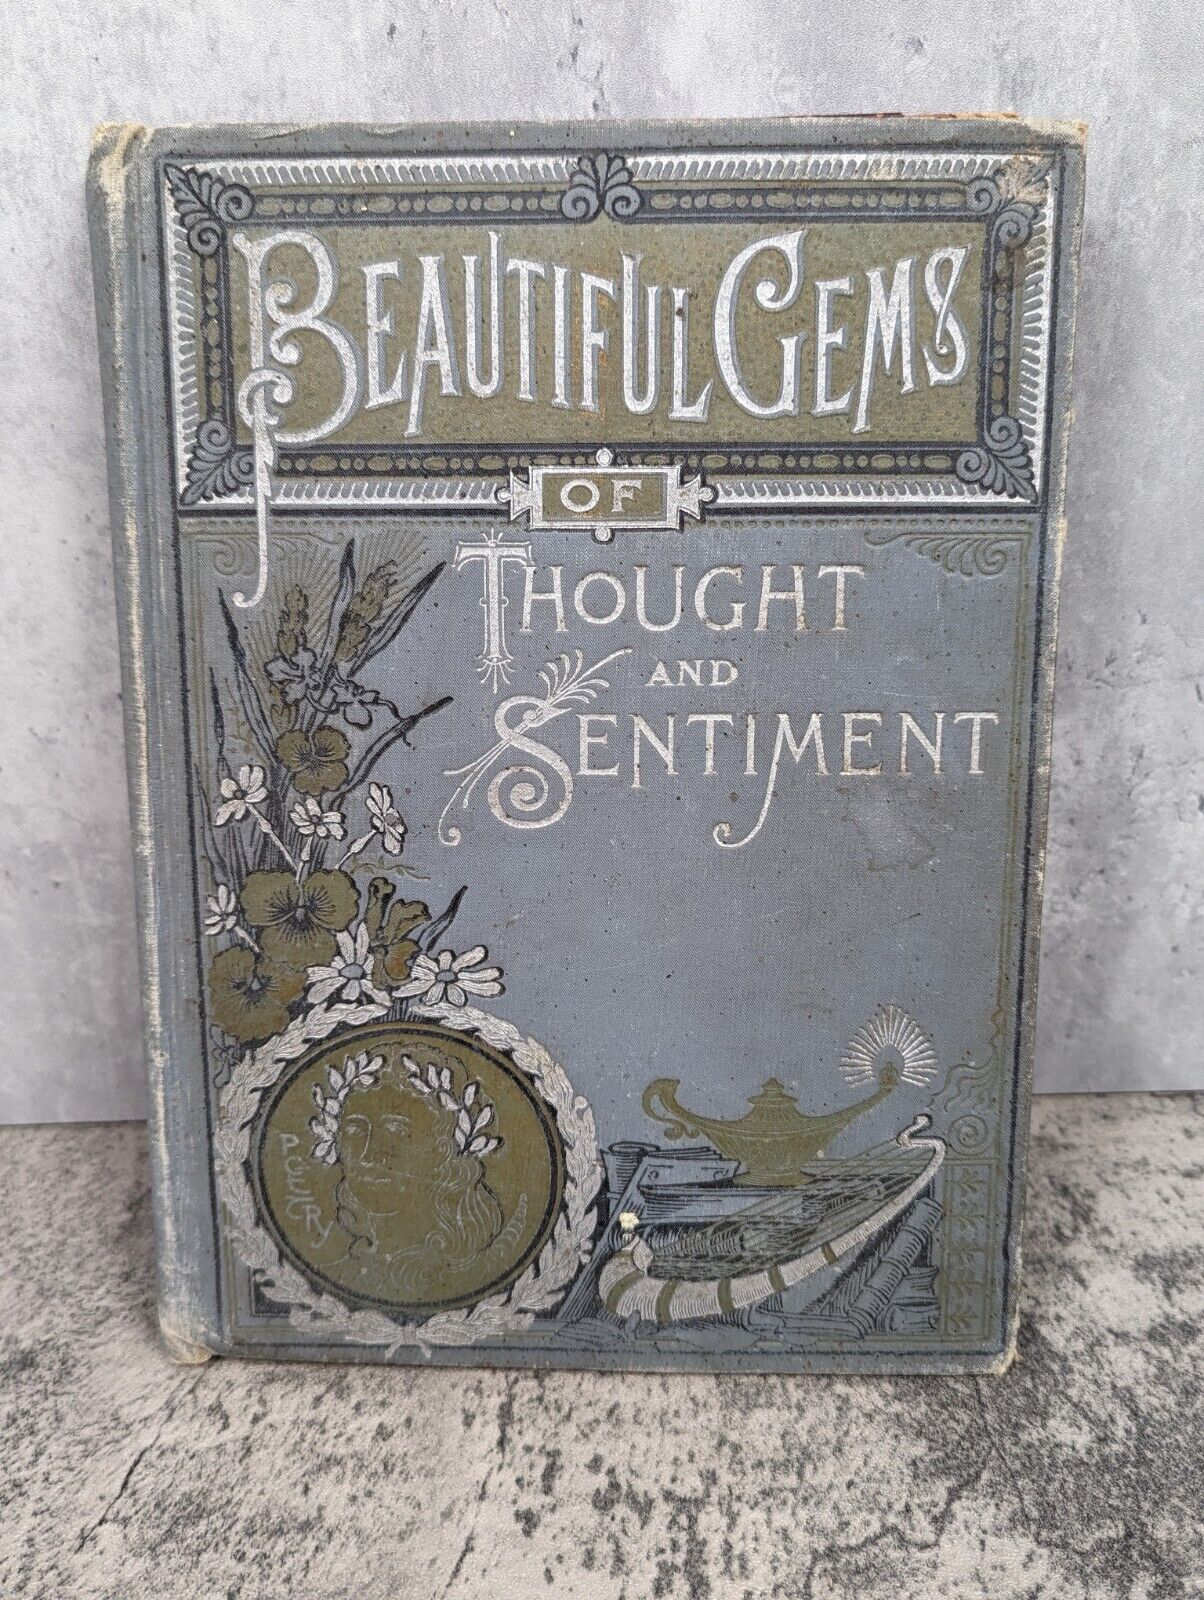 Vintage 1890 Victorian Beautiful Gems of Thought and Sentiment - Poetry & Prose